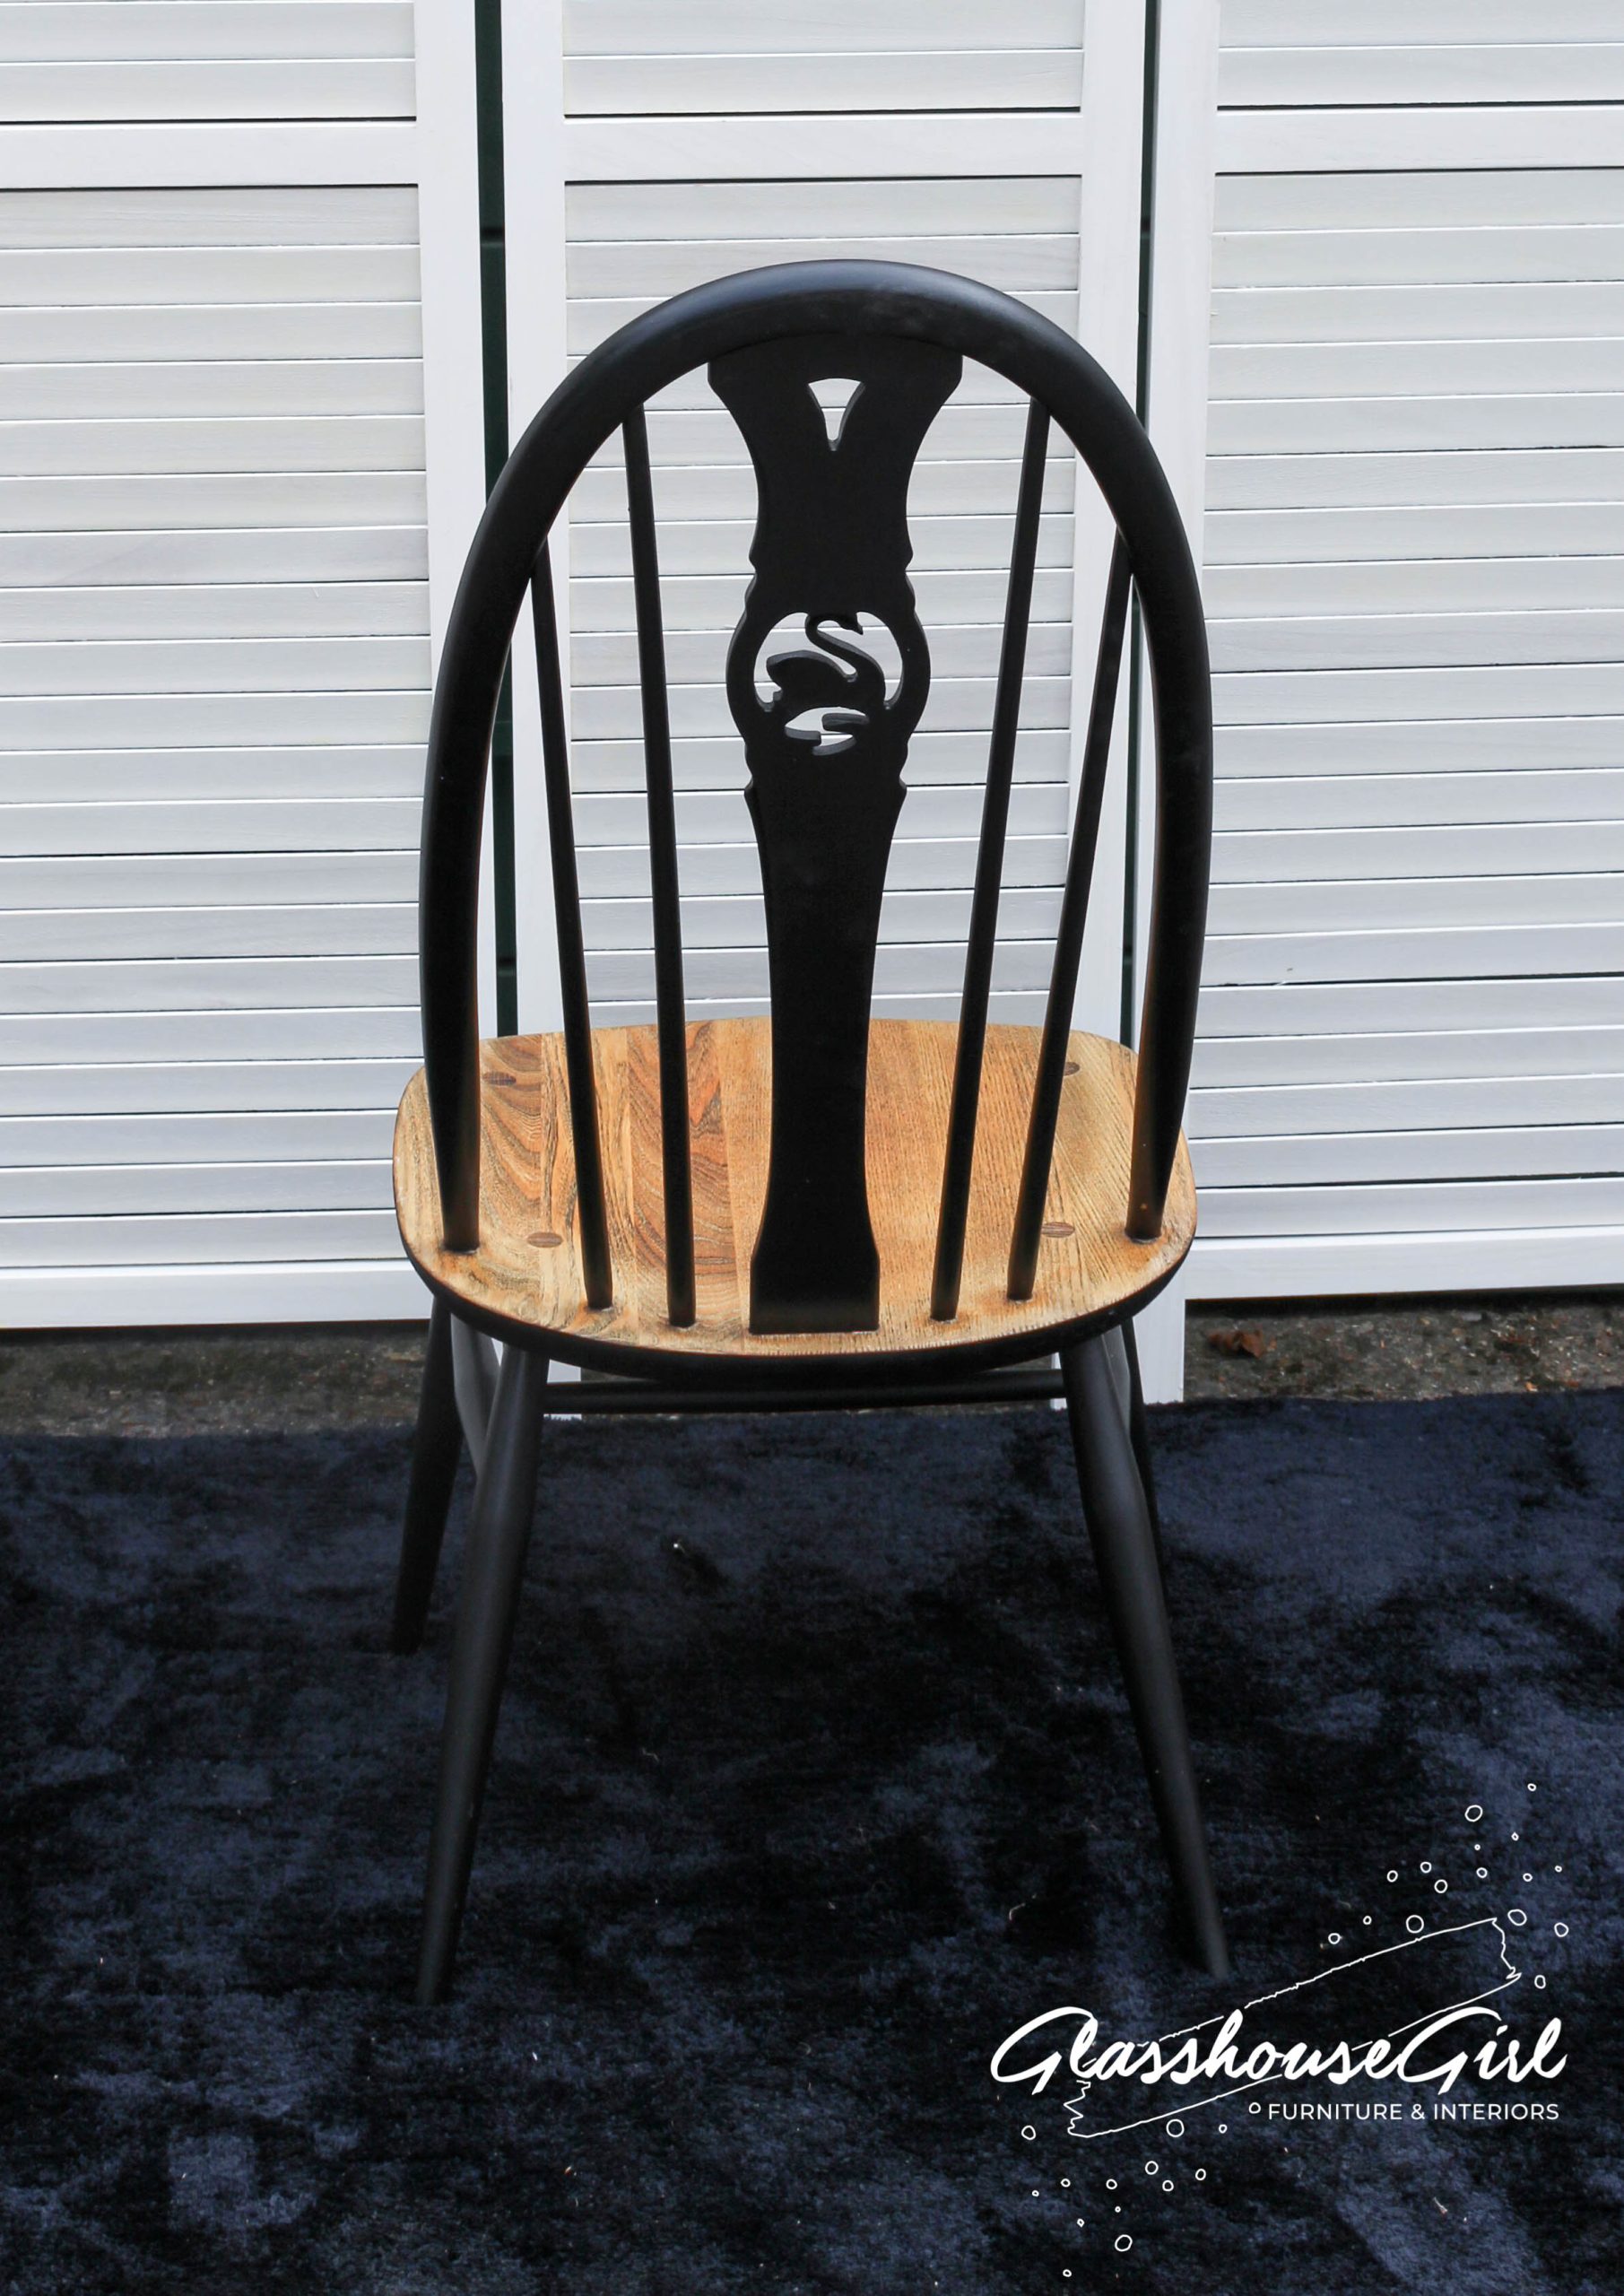 Ercol Swan Back Dining Chair in Very Good Condition